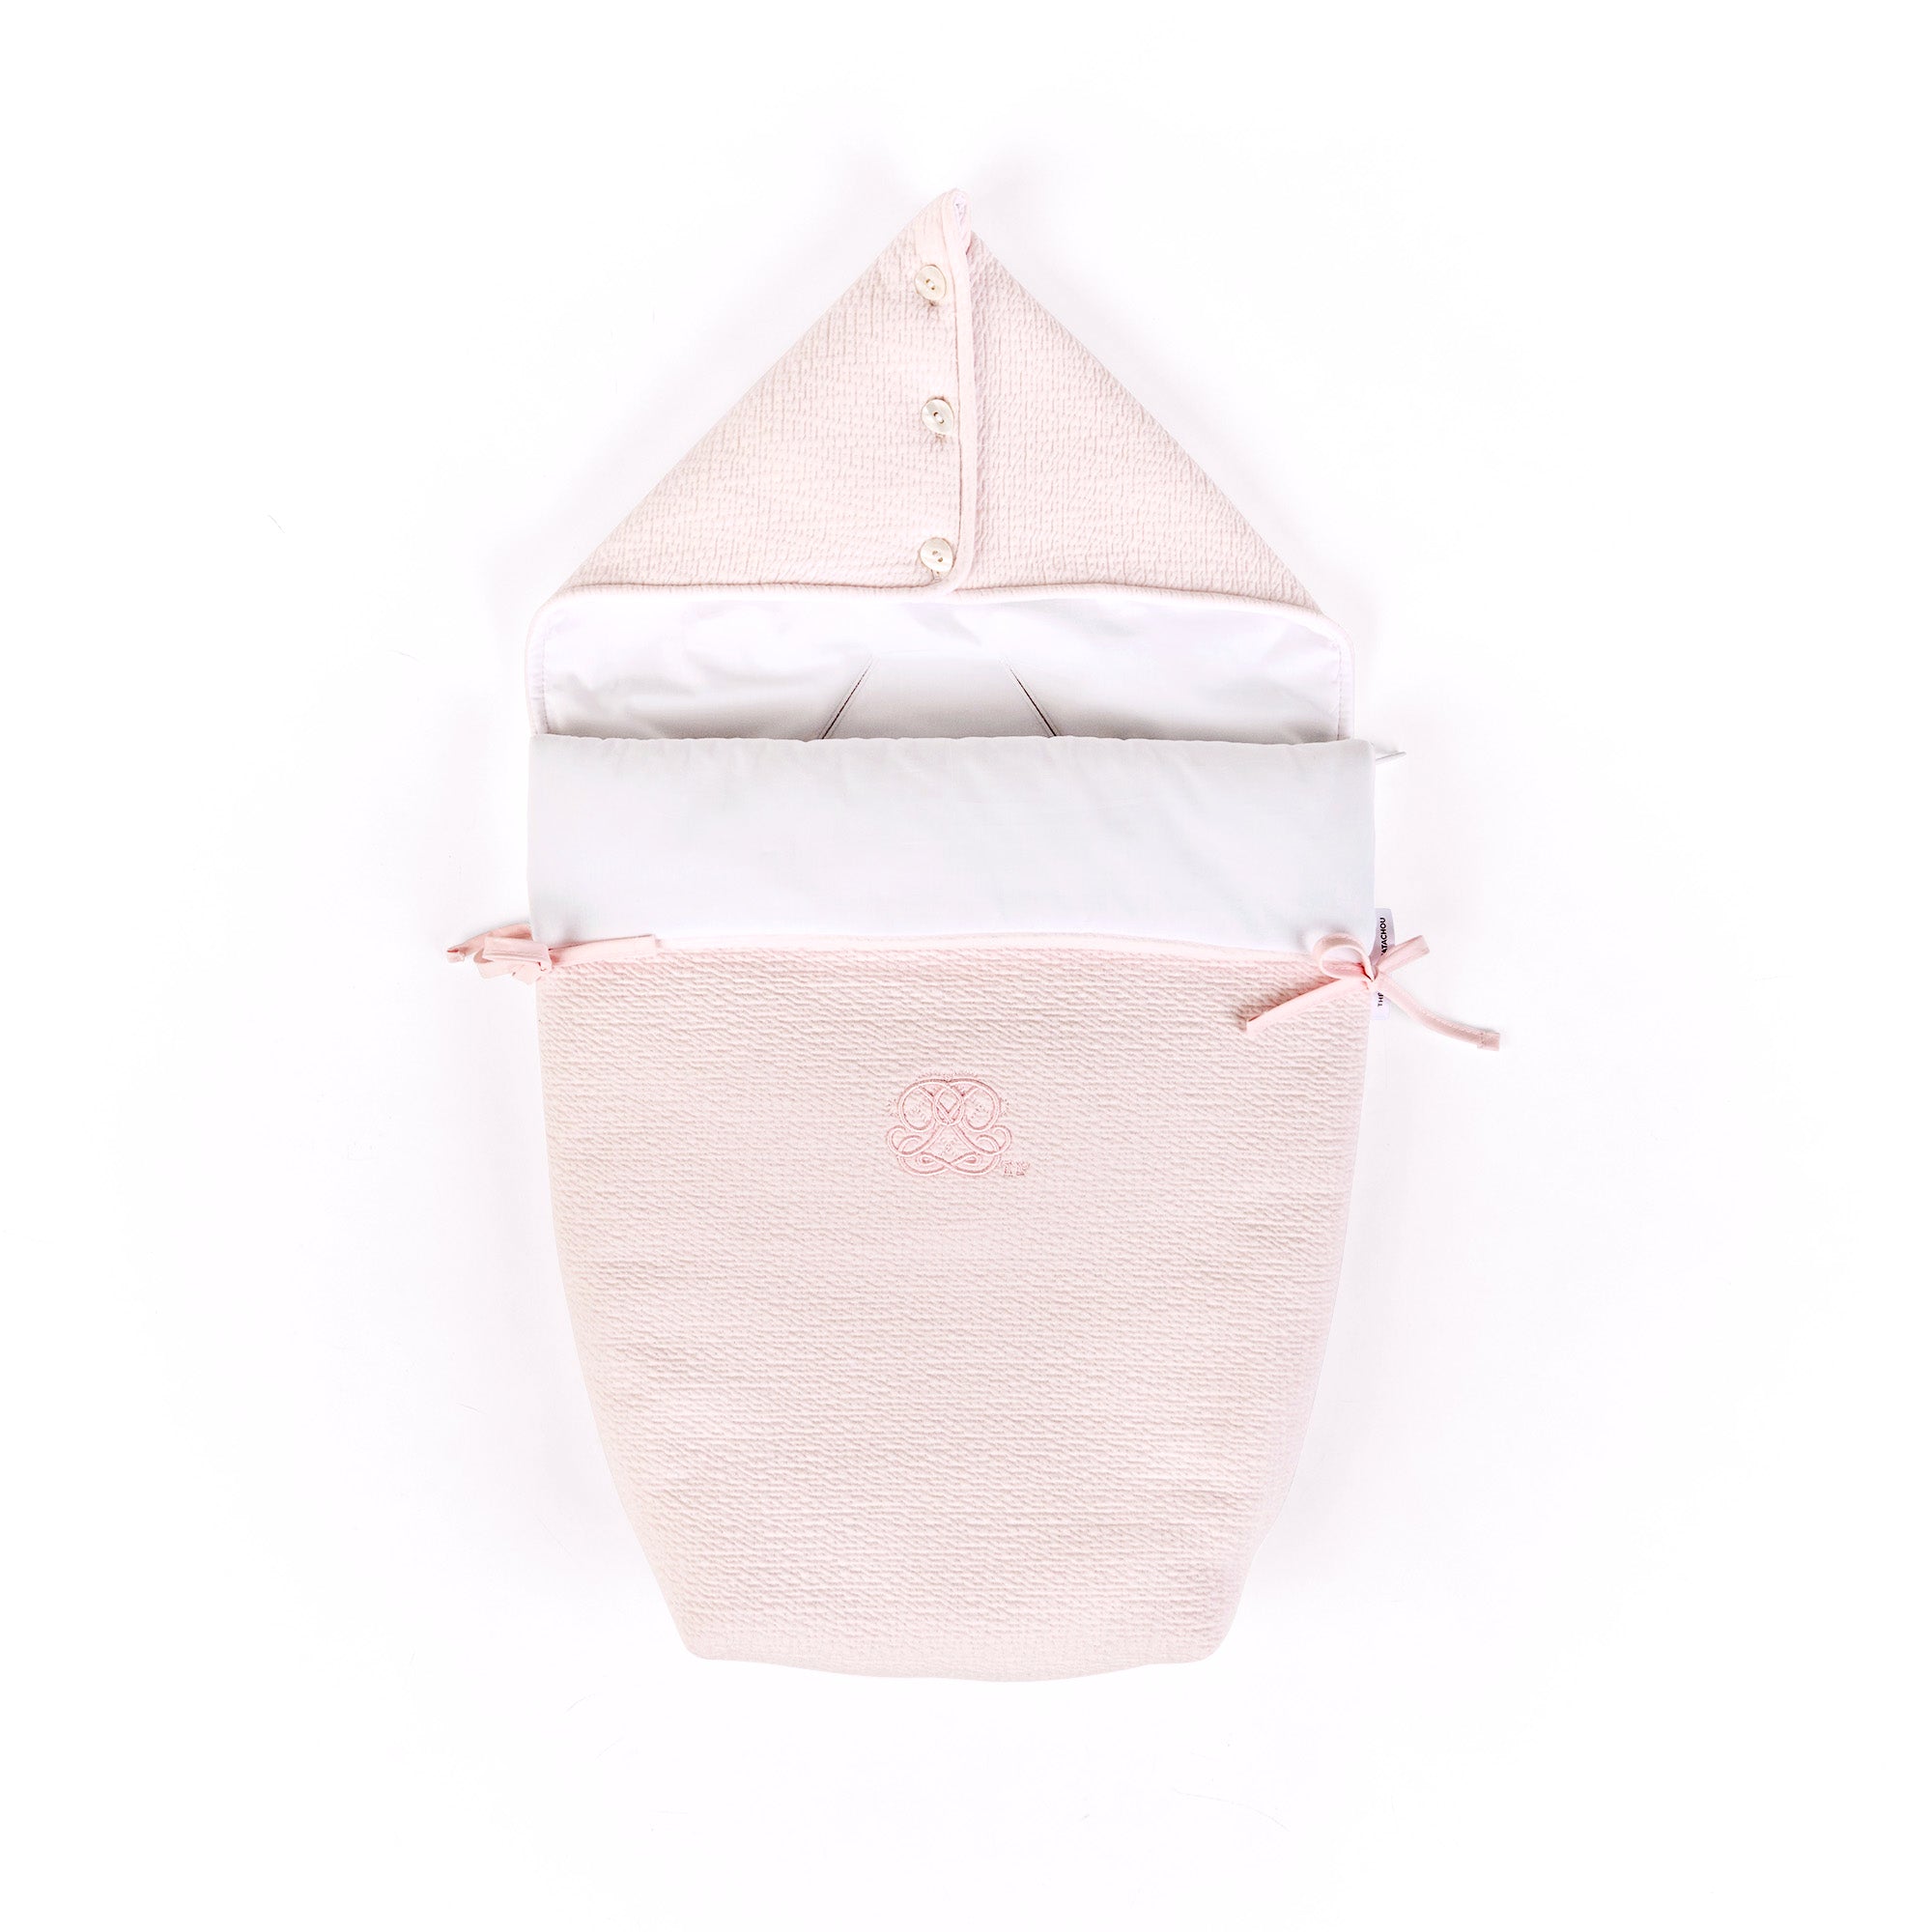 Theophile & Patachou Hooded Sleeping Bag with 3-Point Fixation - Cotton Pink